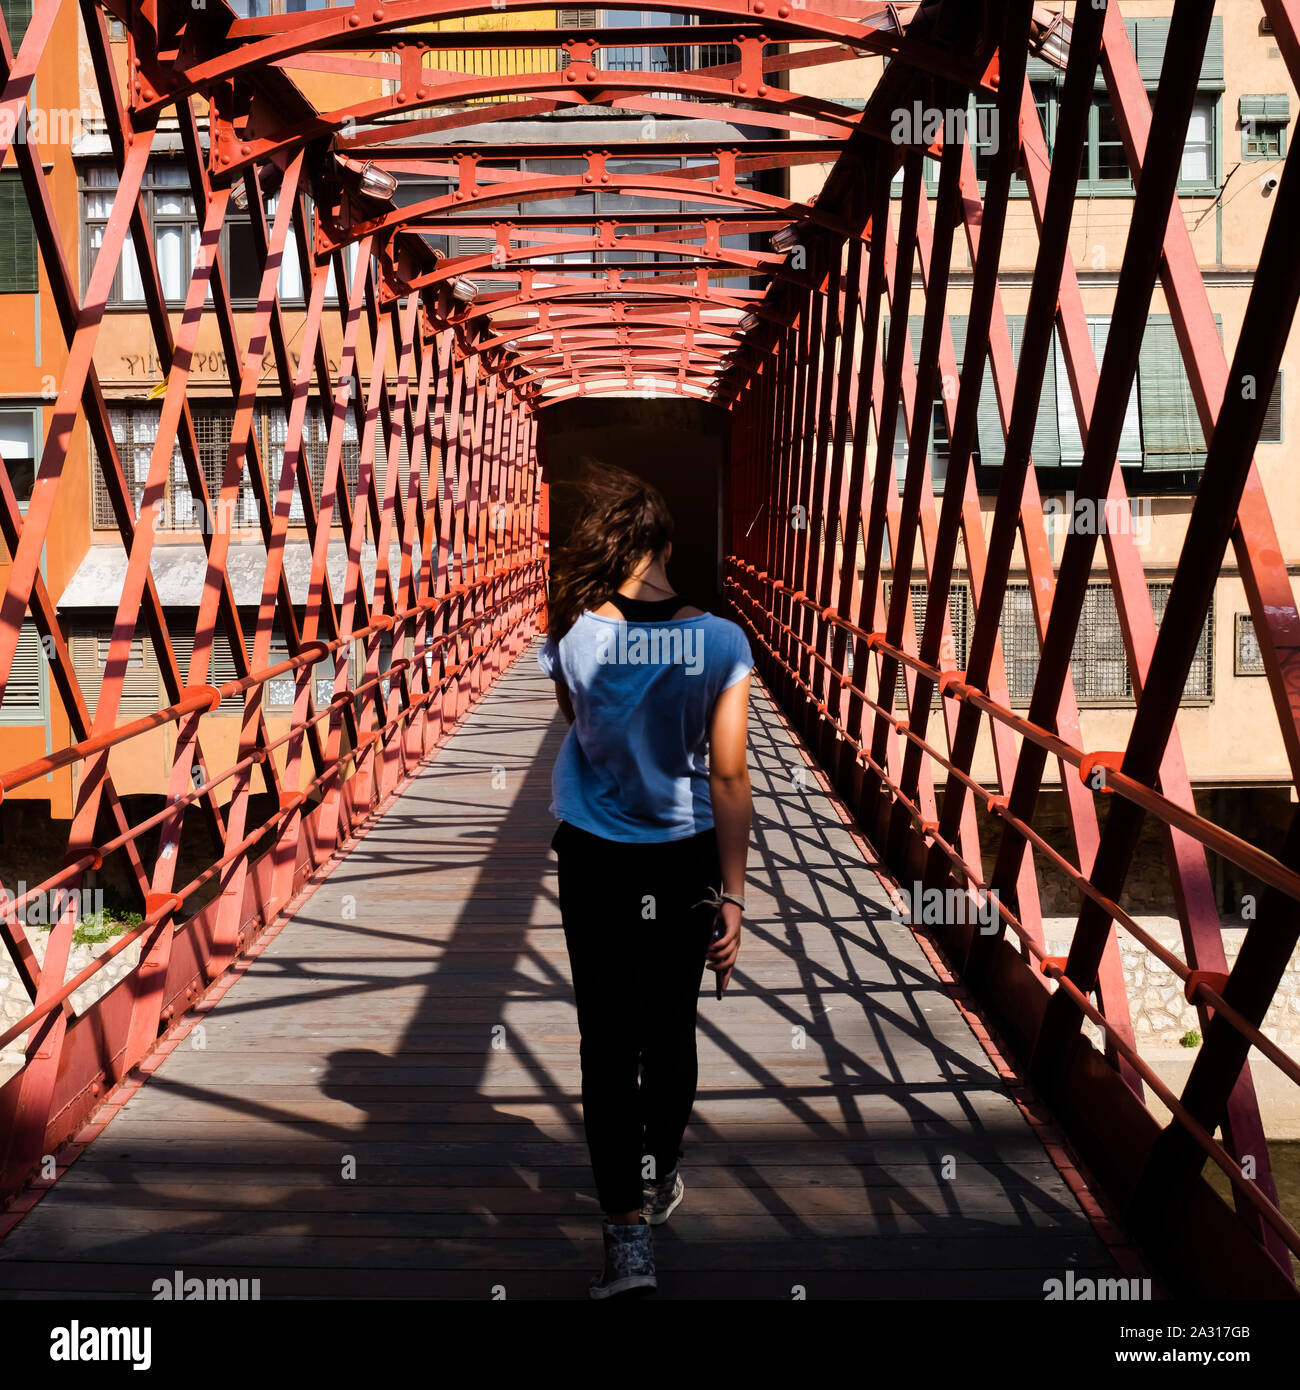 Back view of a young girl with fluttering brown hair, wearing a blue summer t-shirt and crossing the Pont de les Peixateries Velles in Gerona, Spain. Stock Photo